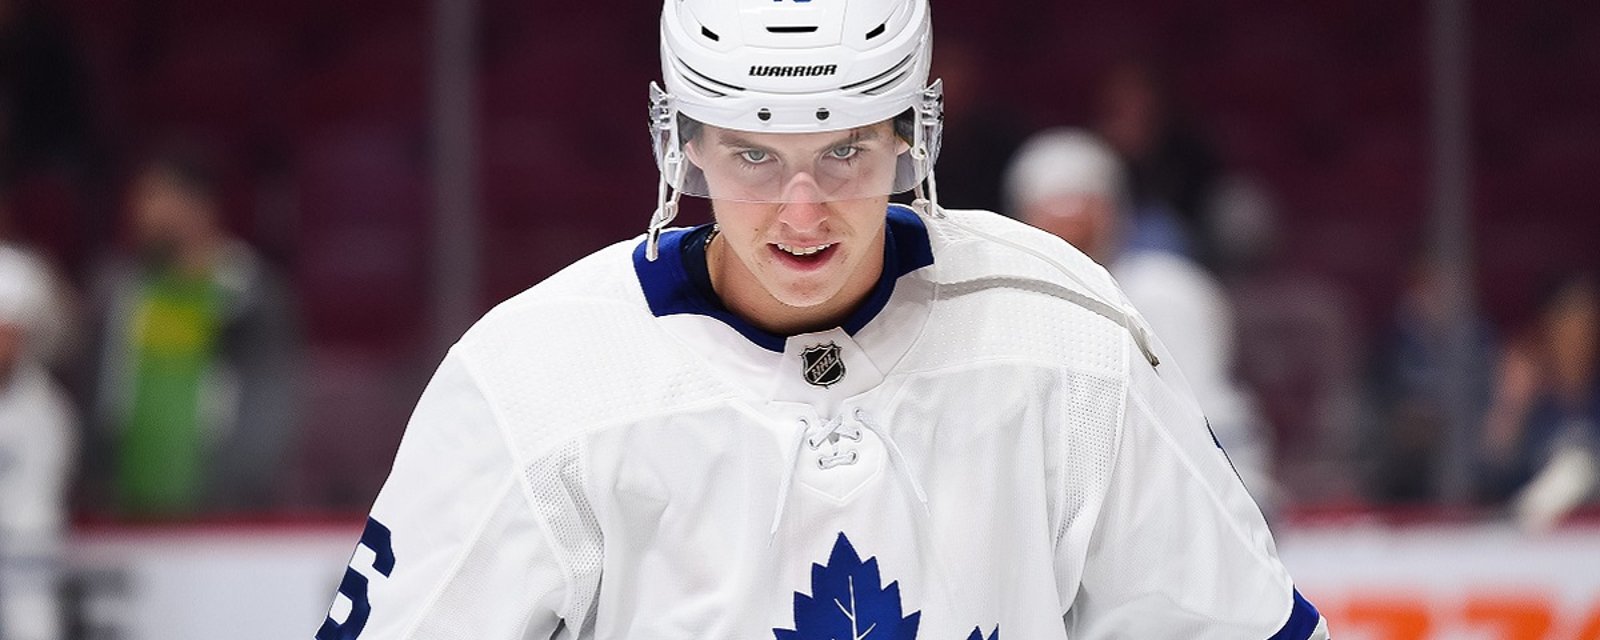 Breaking: Toronto has made Marner a MEGA contract offer and it has been rejected!